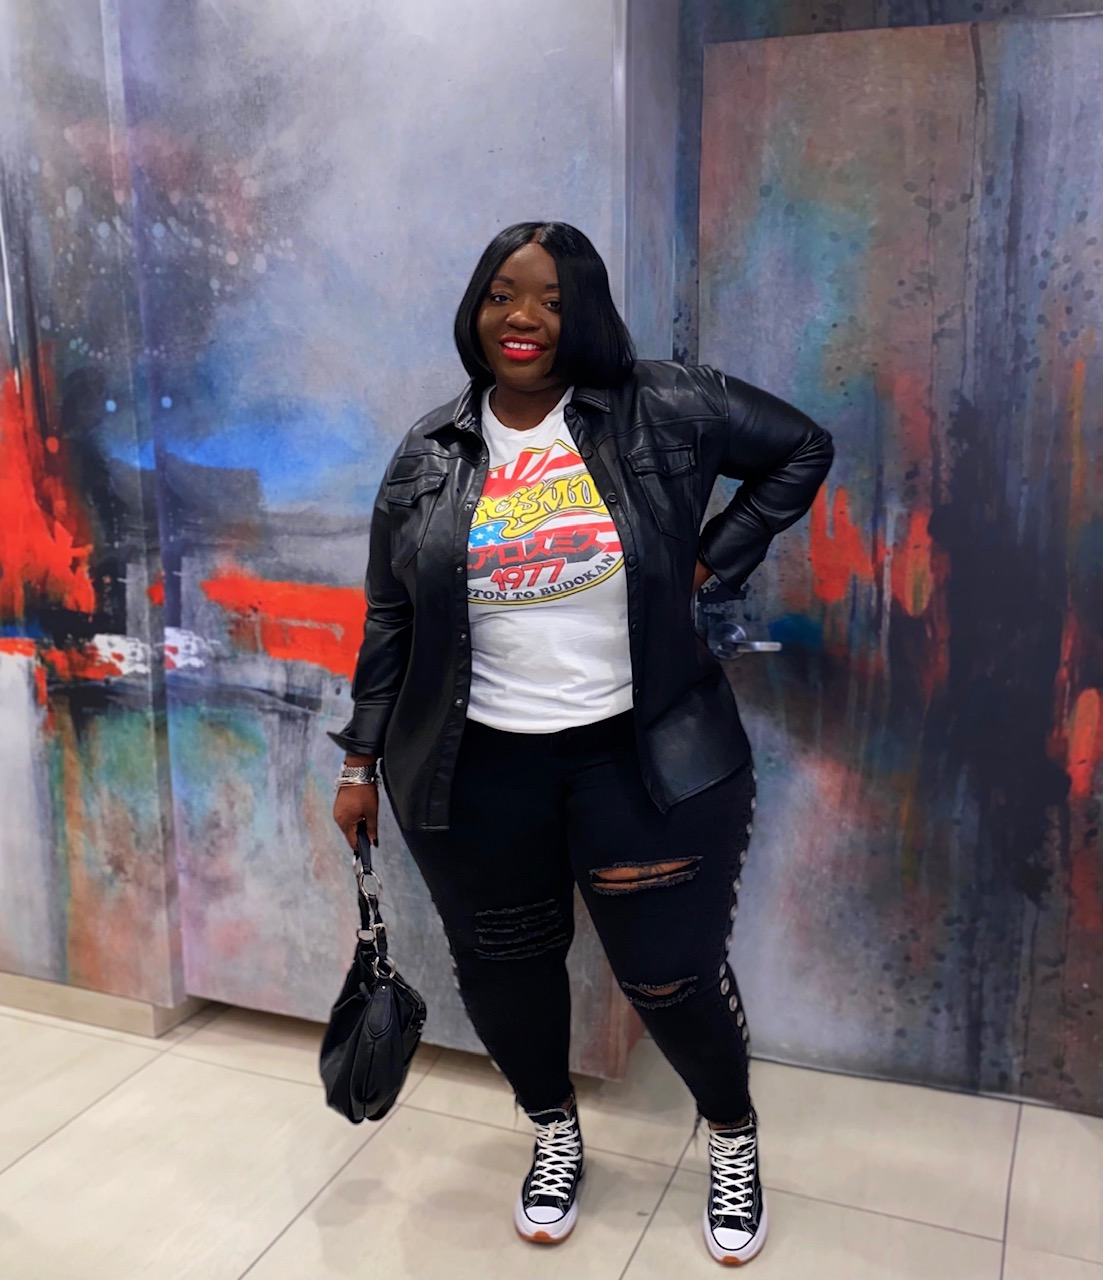 Fashion Bombshell of the Day: Kaishea from New York